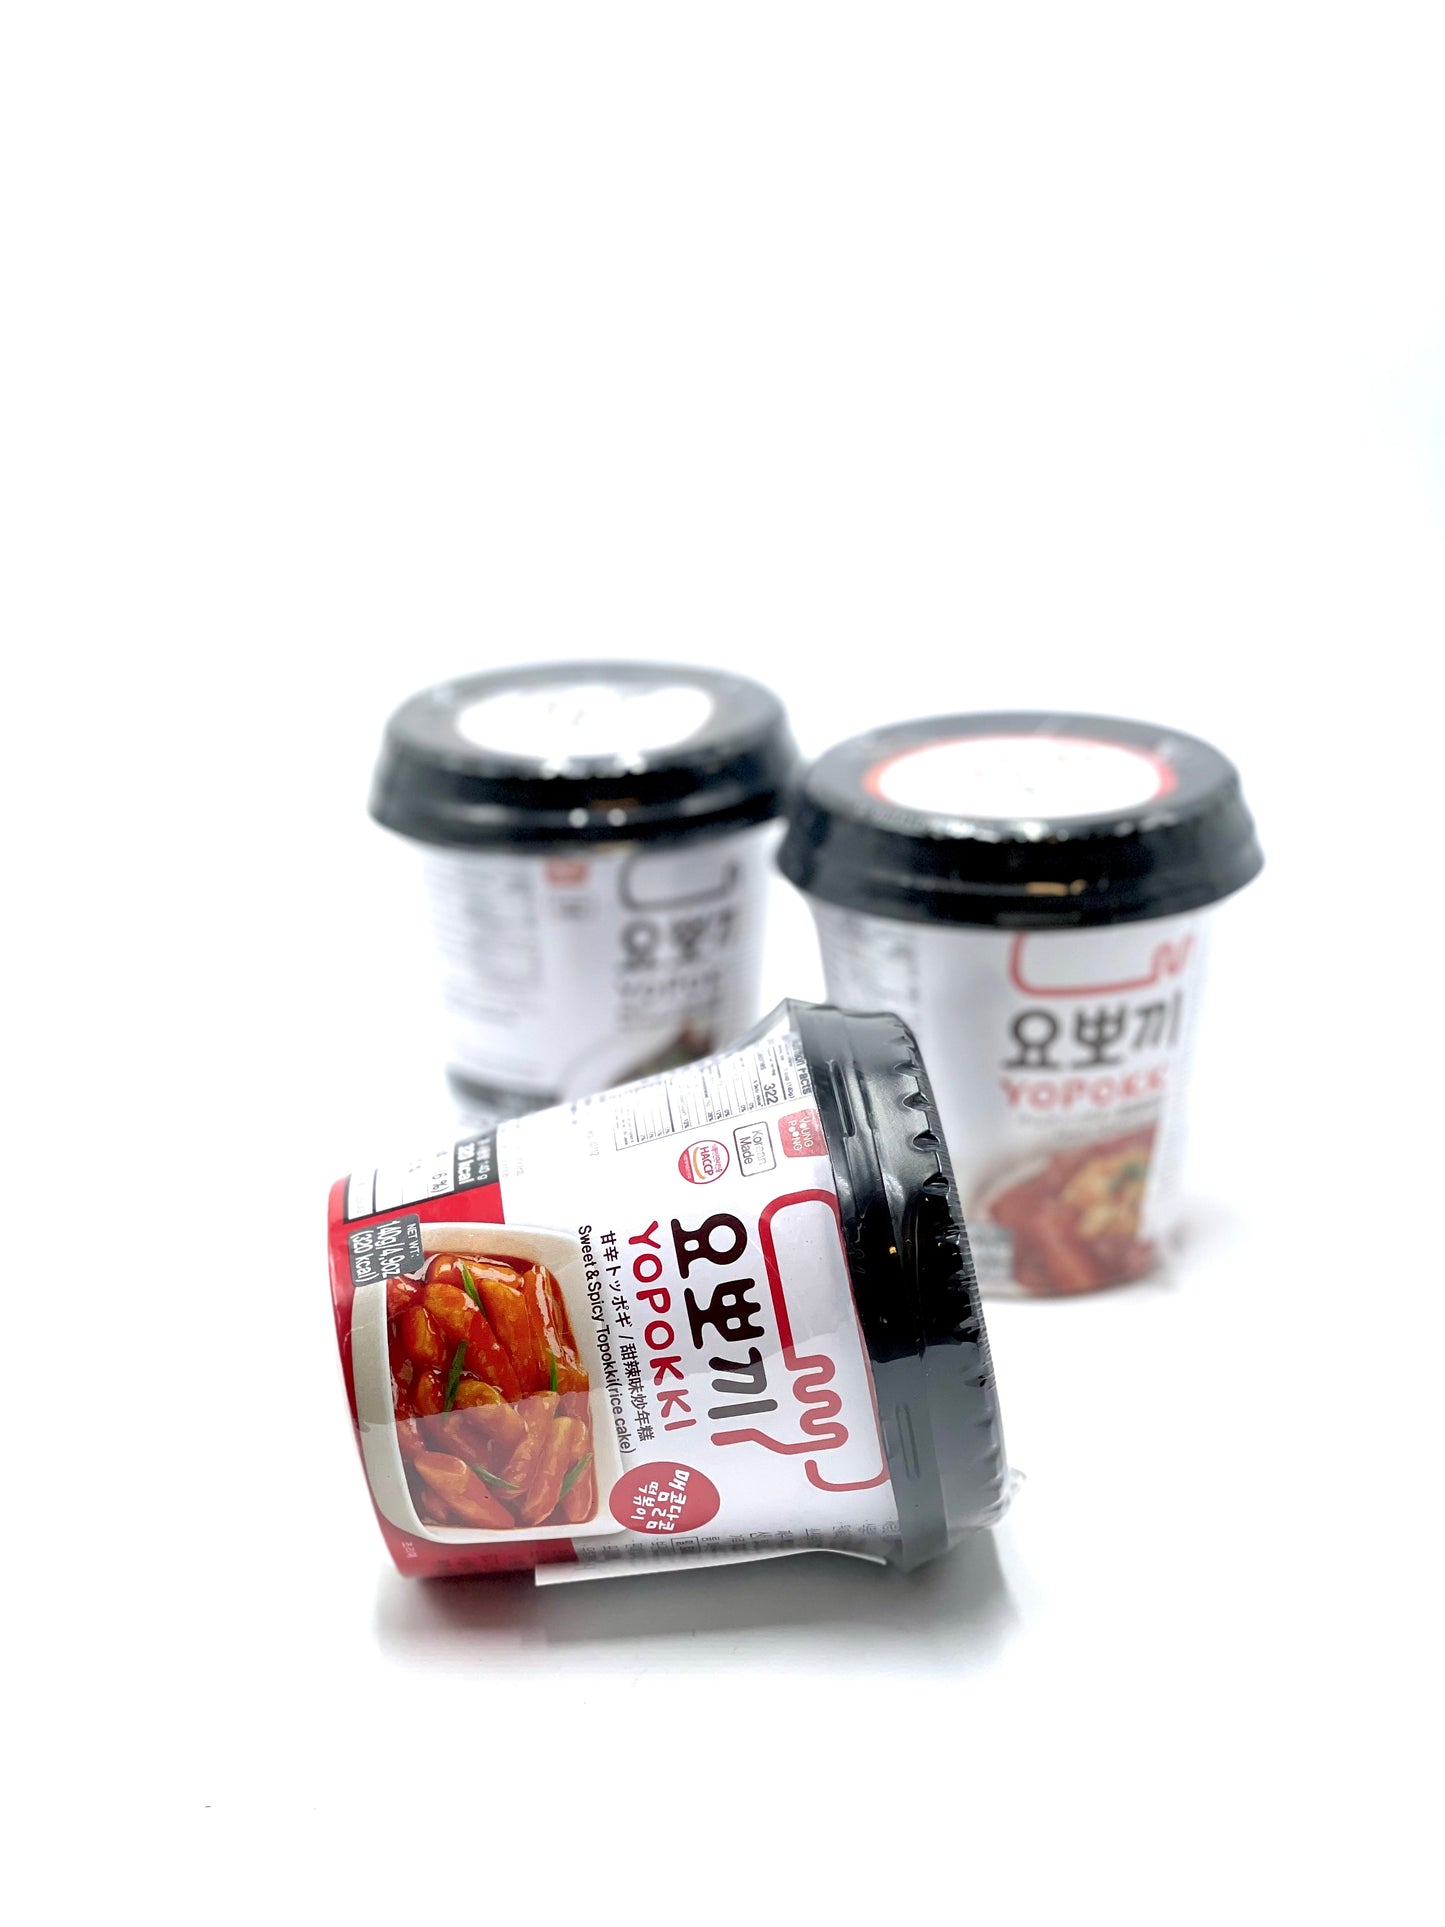 YoungPoong cup Yoppokki Sweet&Spicy 140g